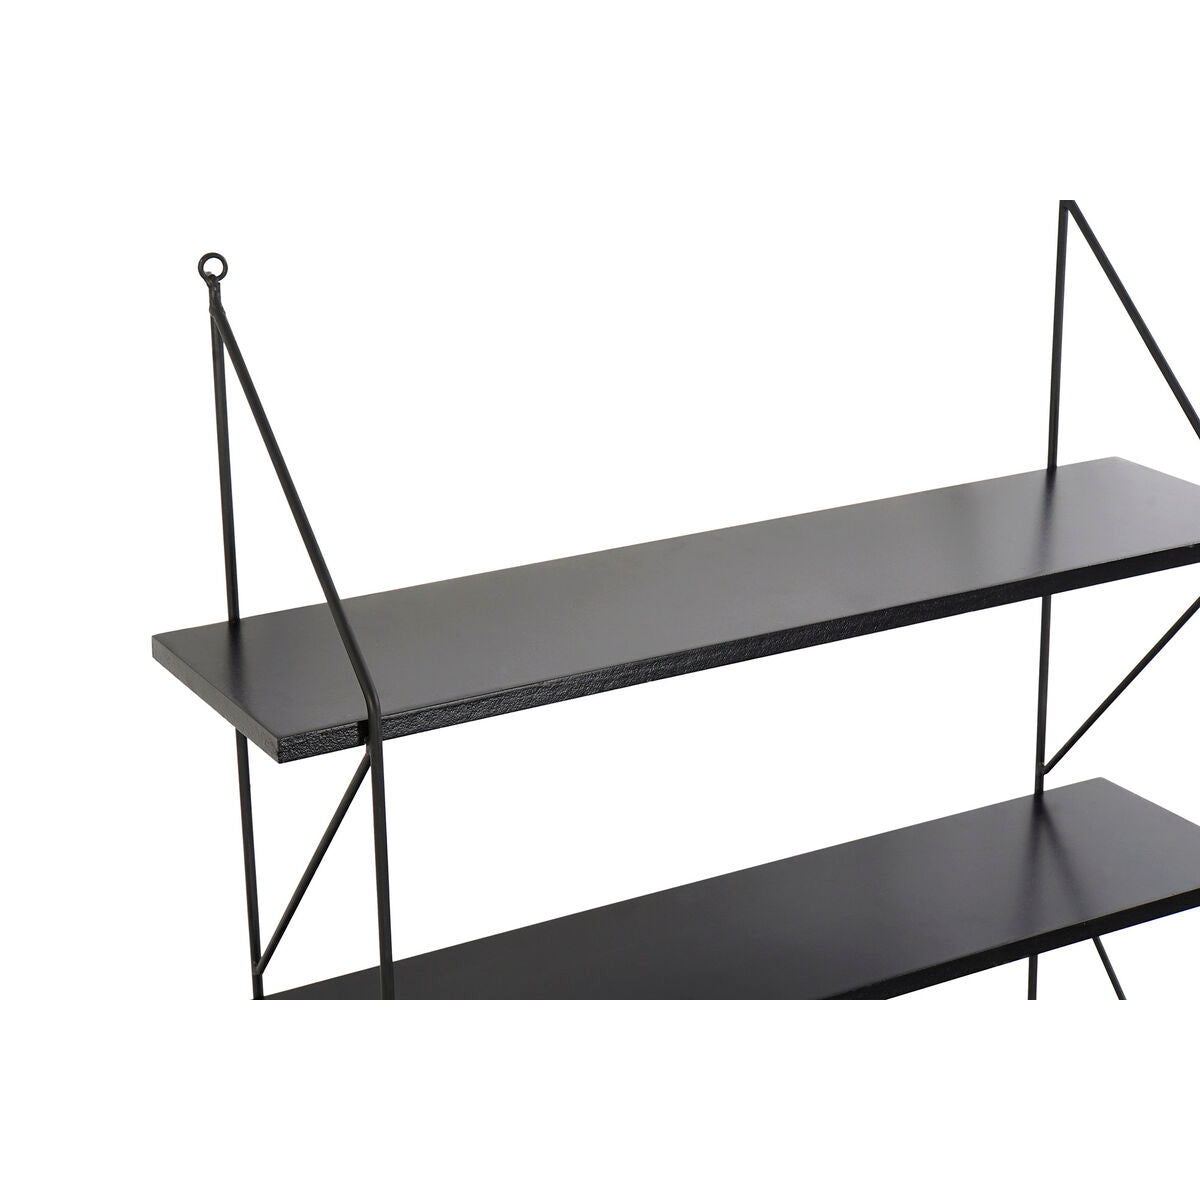 Shelving Unit in Wood and Black Metal Structure (60 x 16 x 123 cm)